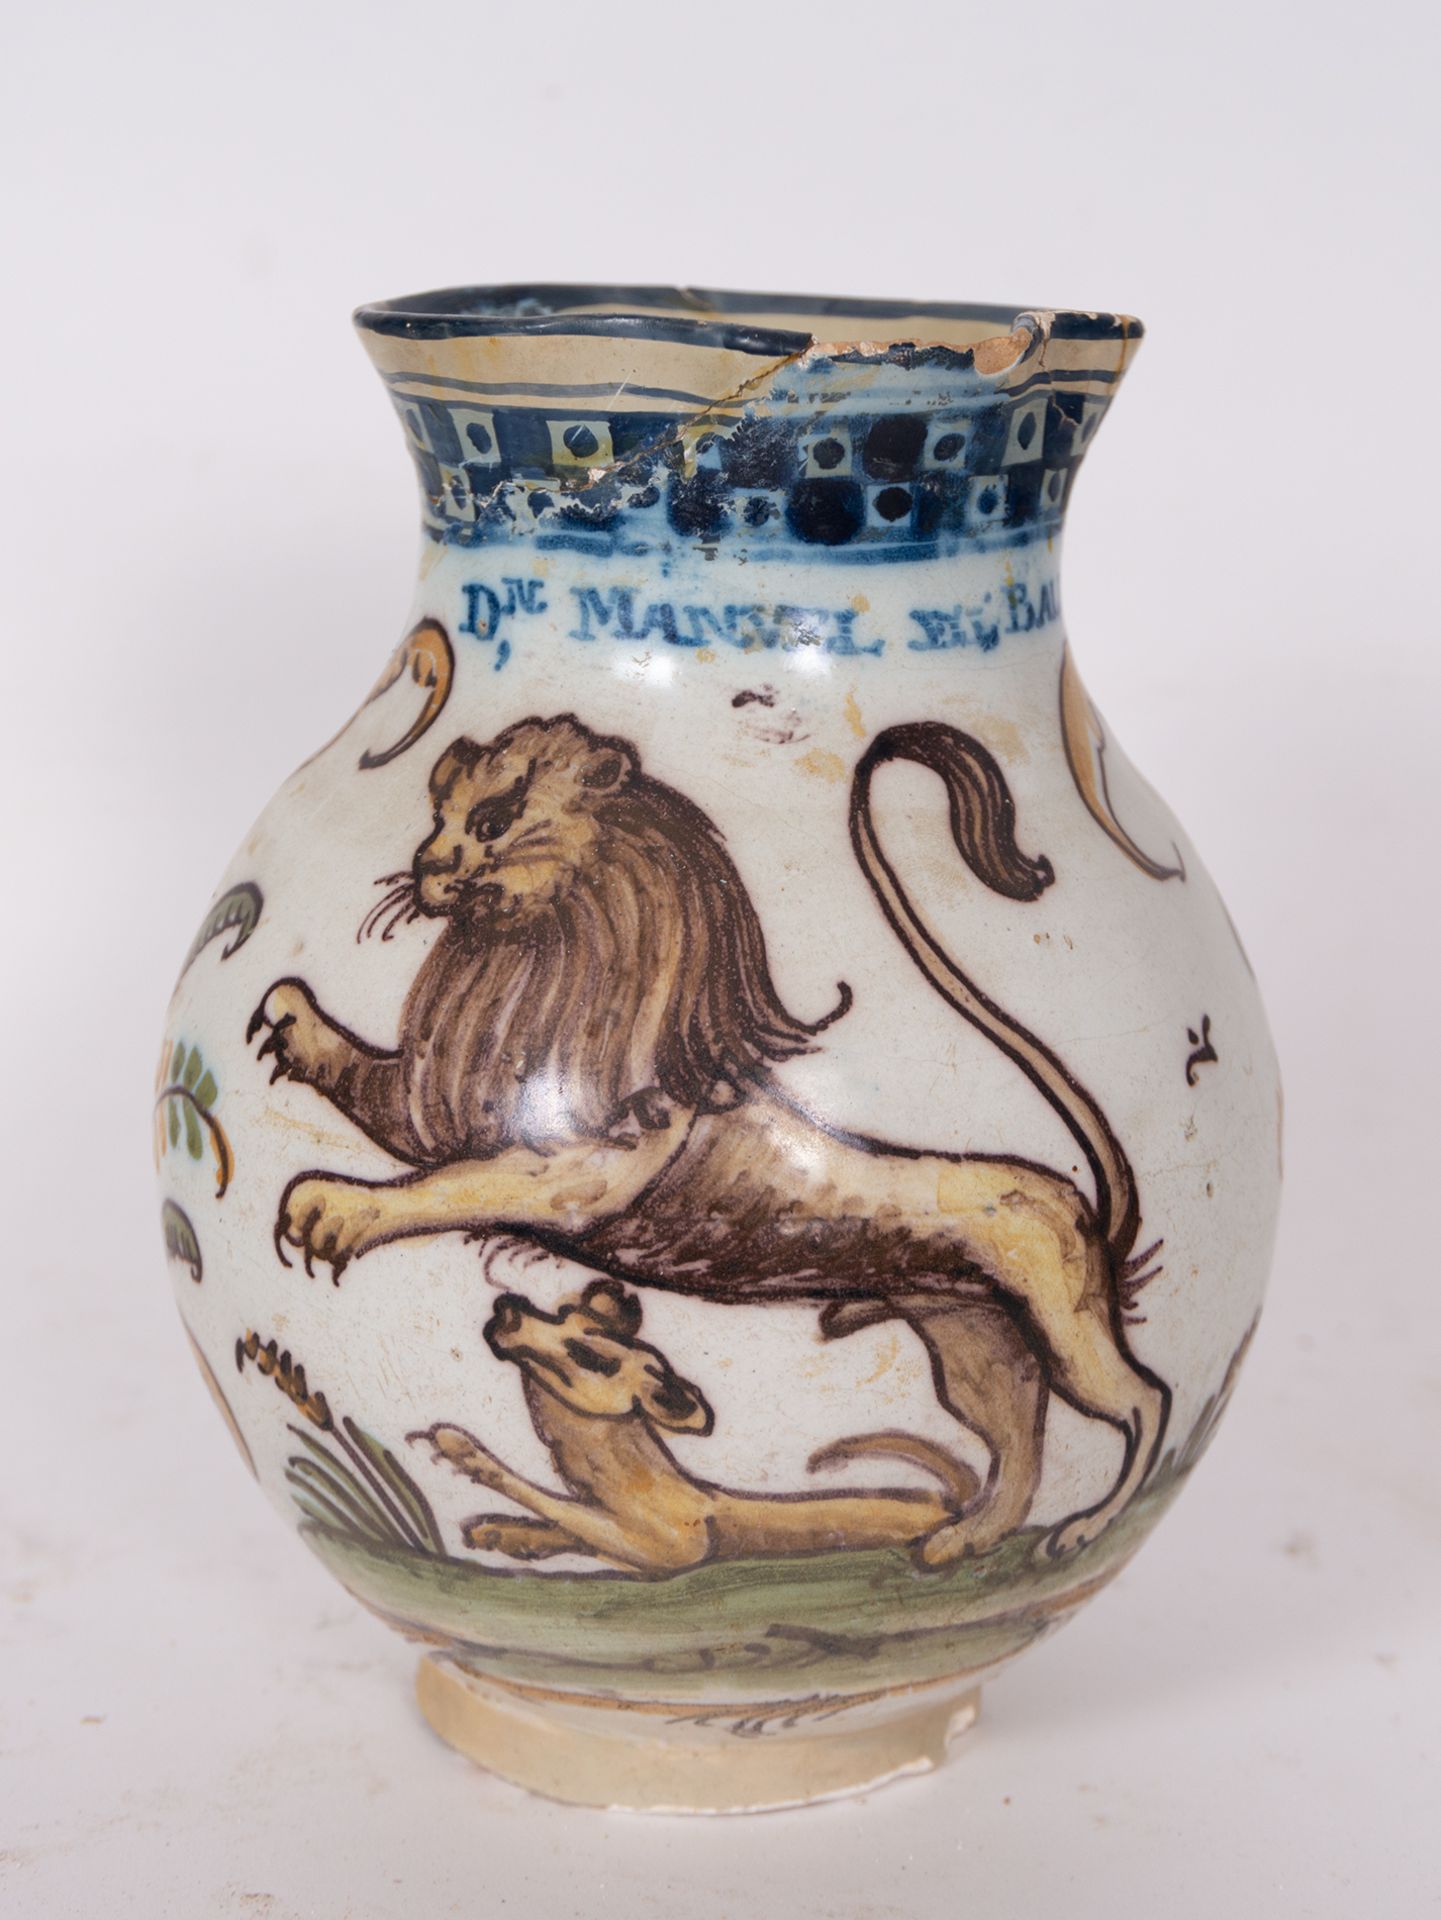 Talavera jug with Lions and "Don Manuel del Valle" inscription, 18th century